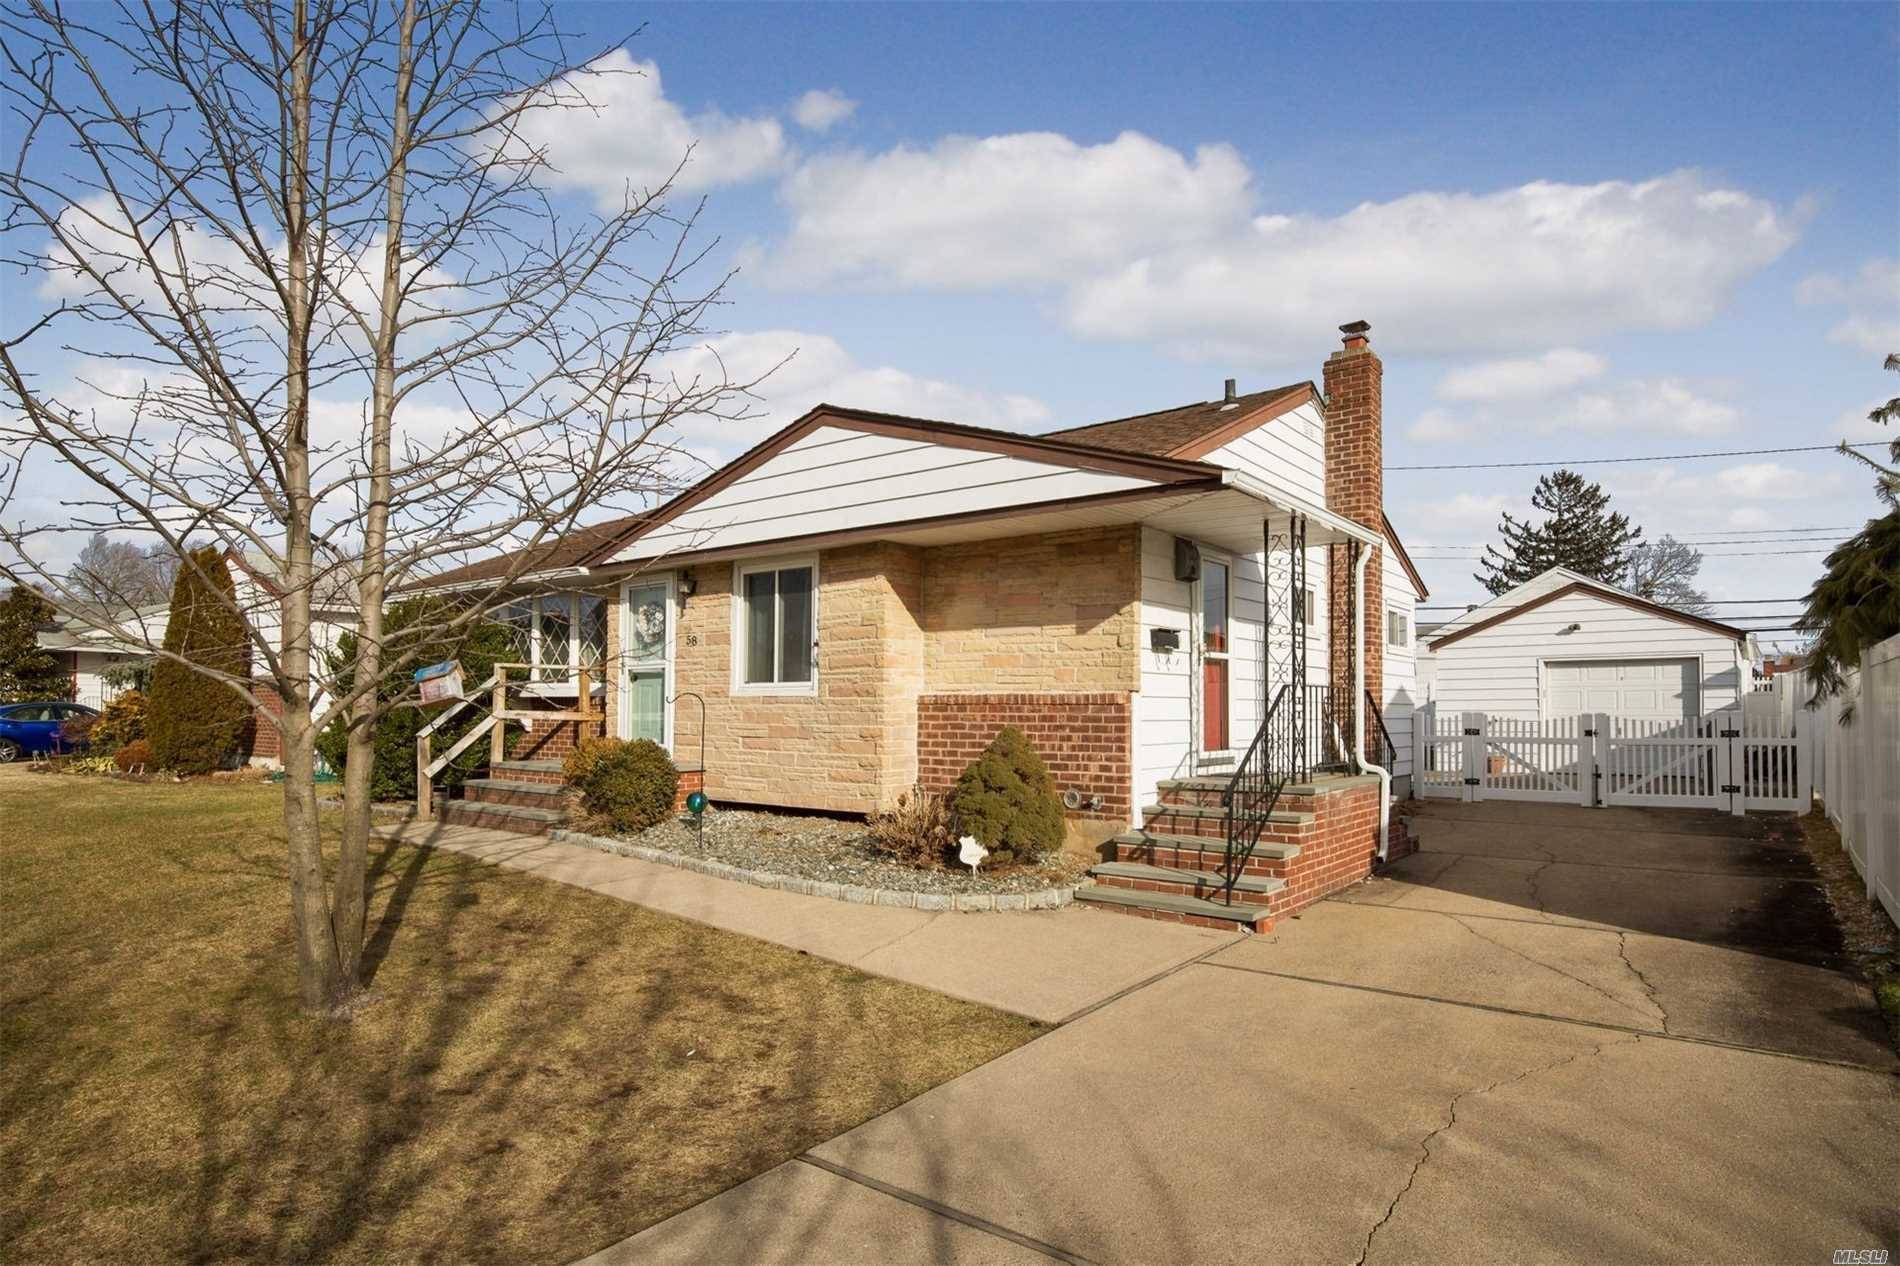 Lovely Ranch Located In Hillside Terrace Section Of Hicksville.